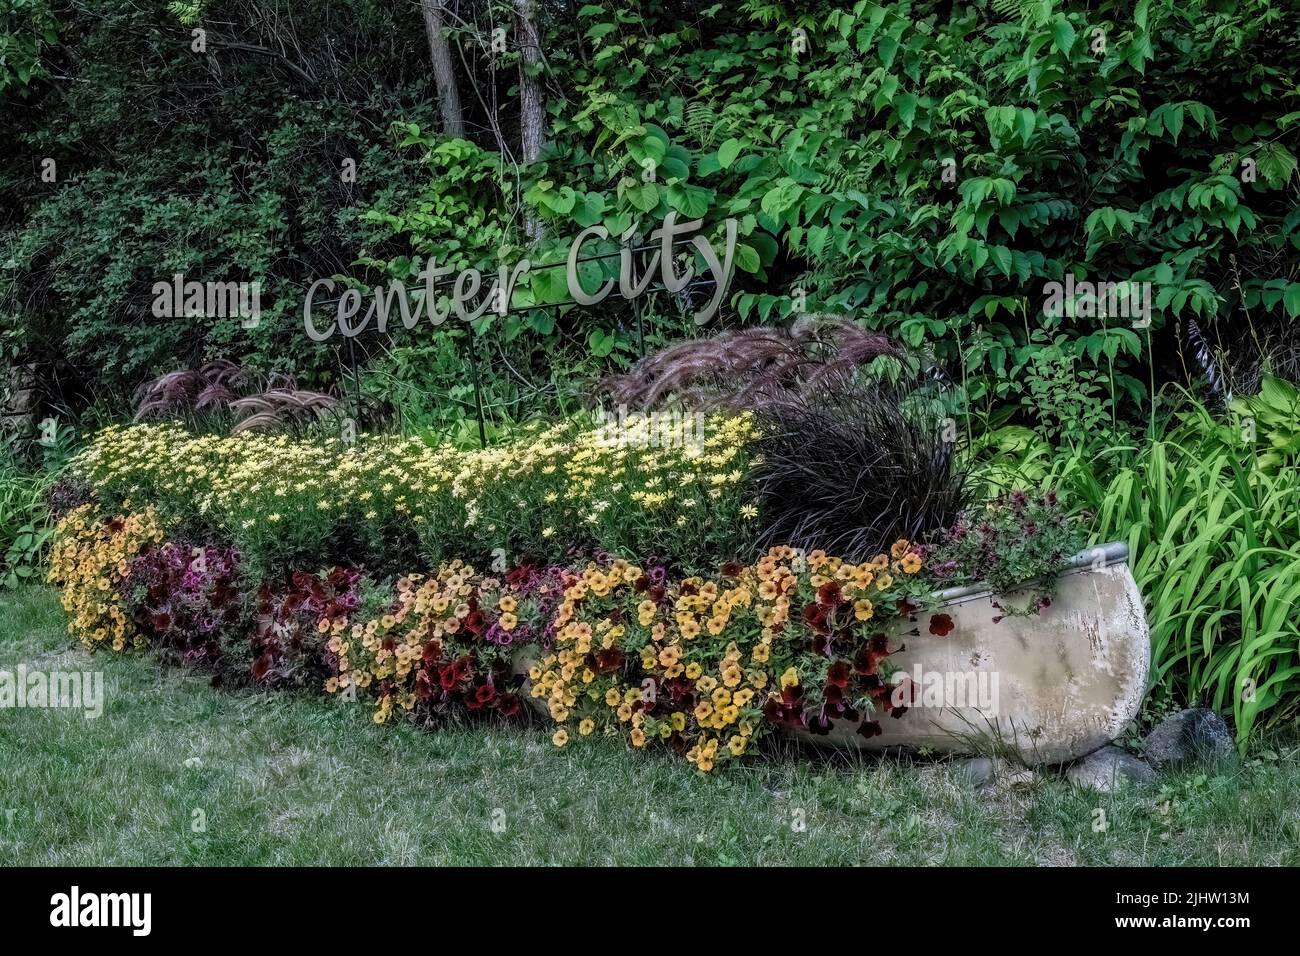 Canoe full of blooming summer annuals for the city of Center City, Minnesota USA. Stock Photo